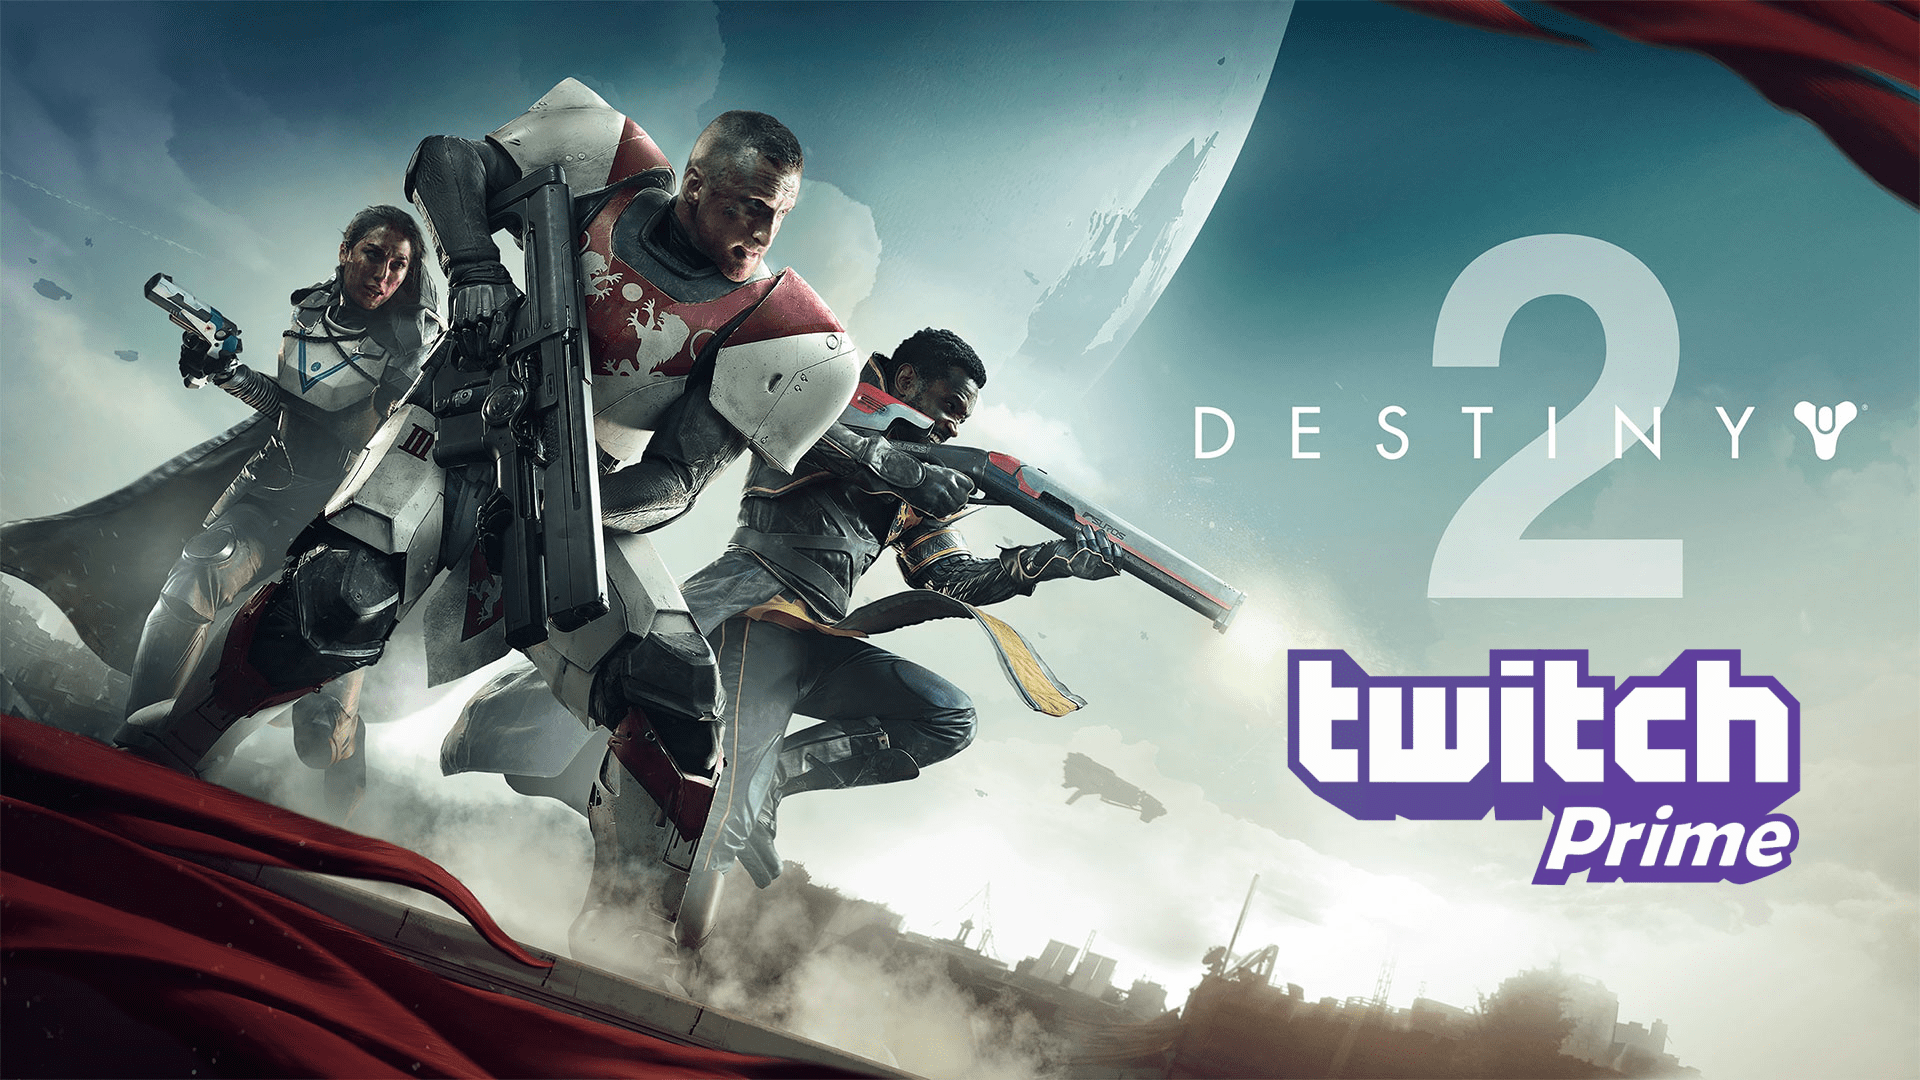 Twitch Prime Subscribers Get Free Destiny 2 Loot